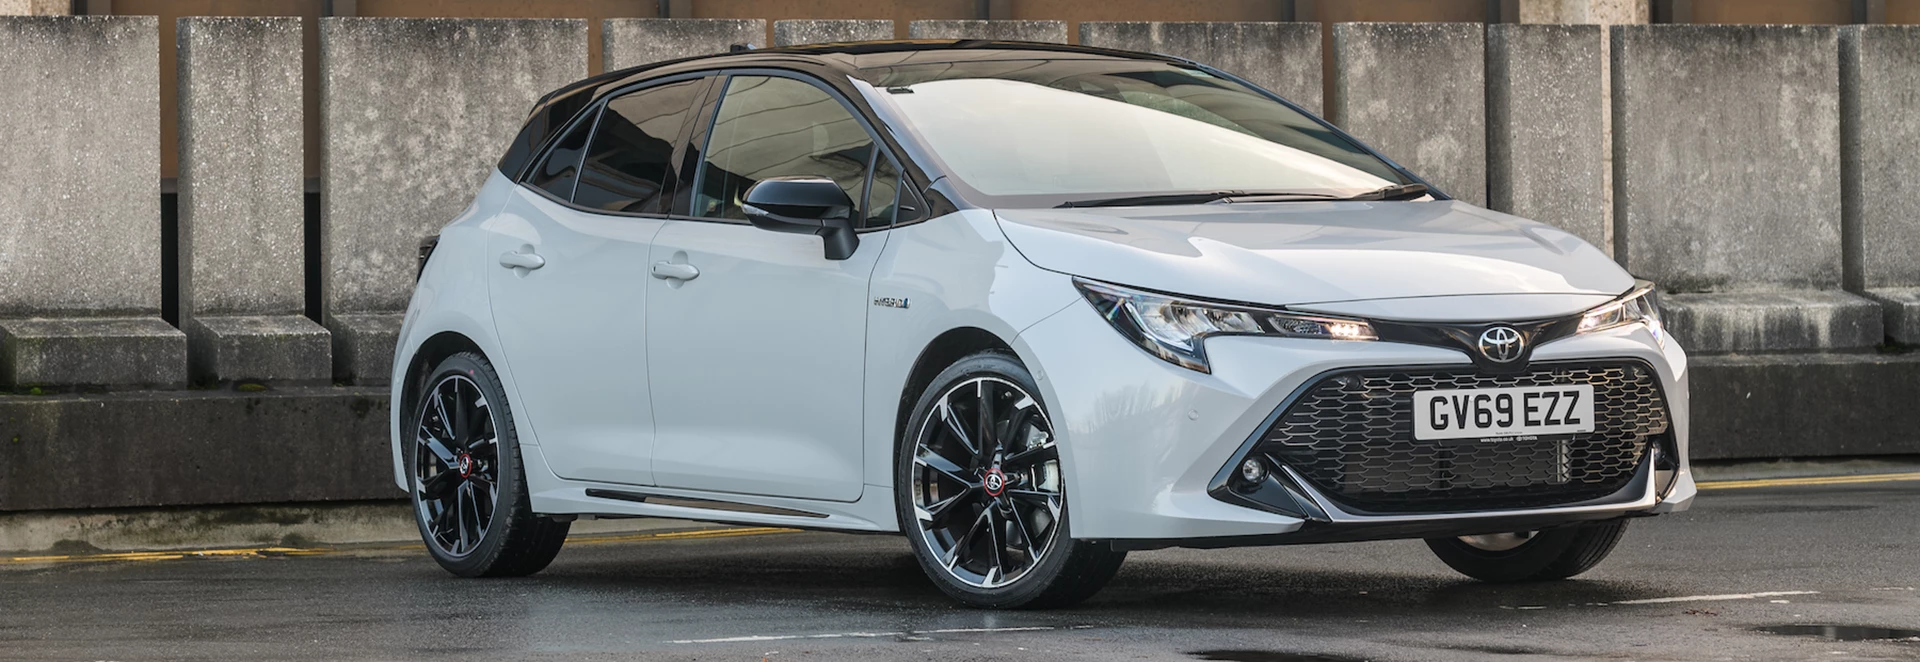 Toyota Corolla Touring GR Sport Should Be Launched Here